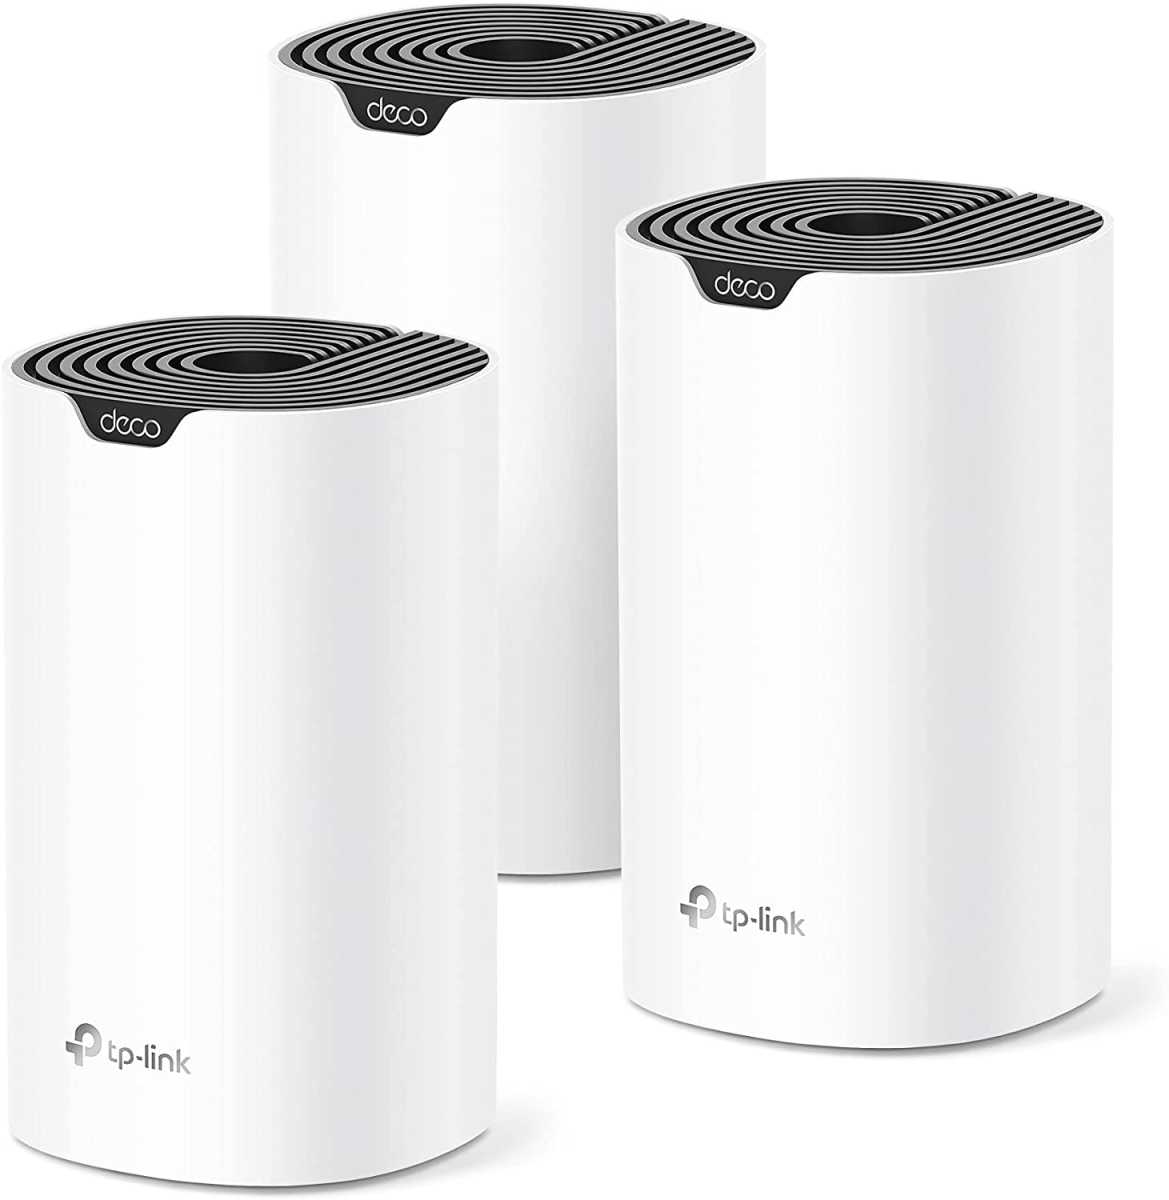 TP-Link Deco S4 (3-pack) on a white background